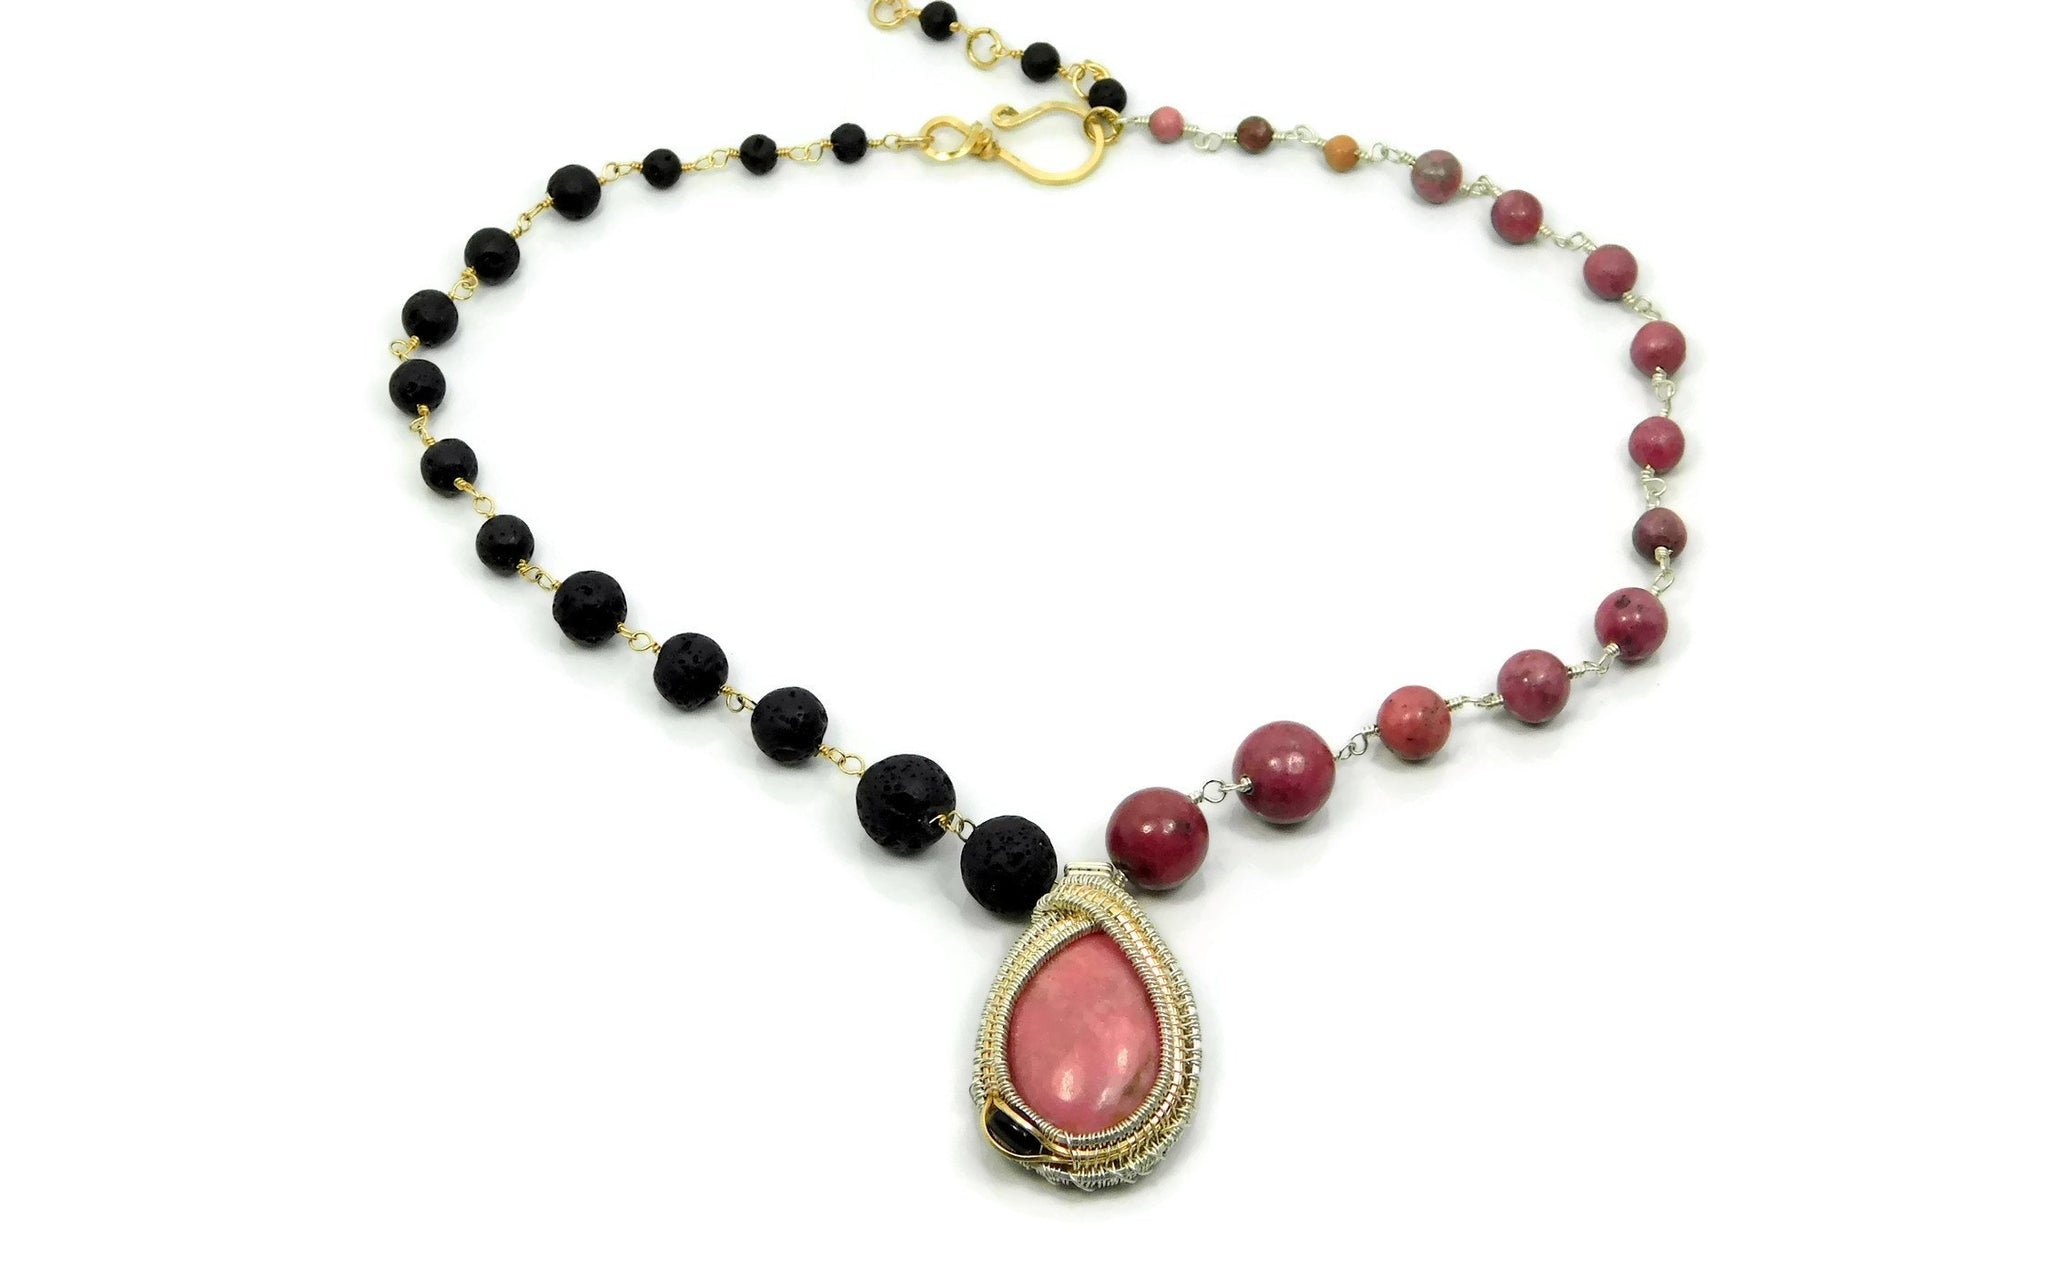 Rhodonite, Black Onyx and Lava Stone Necklace in sterling silver and 14kt gold fill wire necklace cold fusion jewelry gold and silver jewelry handmade silver jewelry sterling silver jewelry artisan jewelry handmade gemstone jewelry one of a kind jewelry unique jewelry